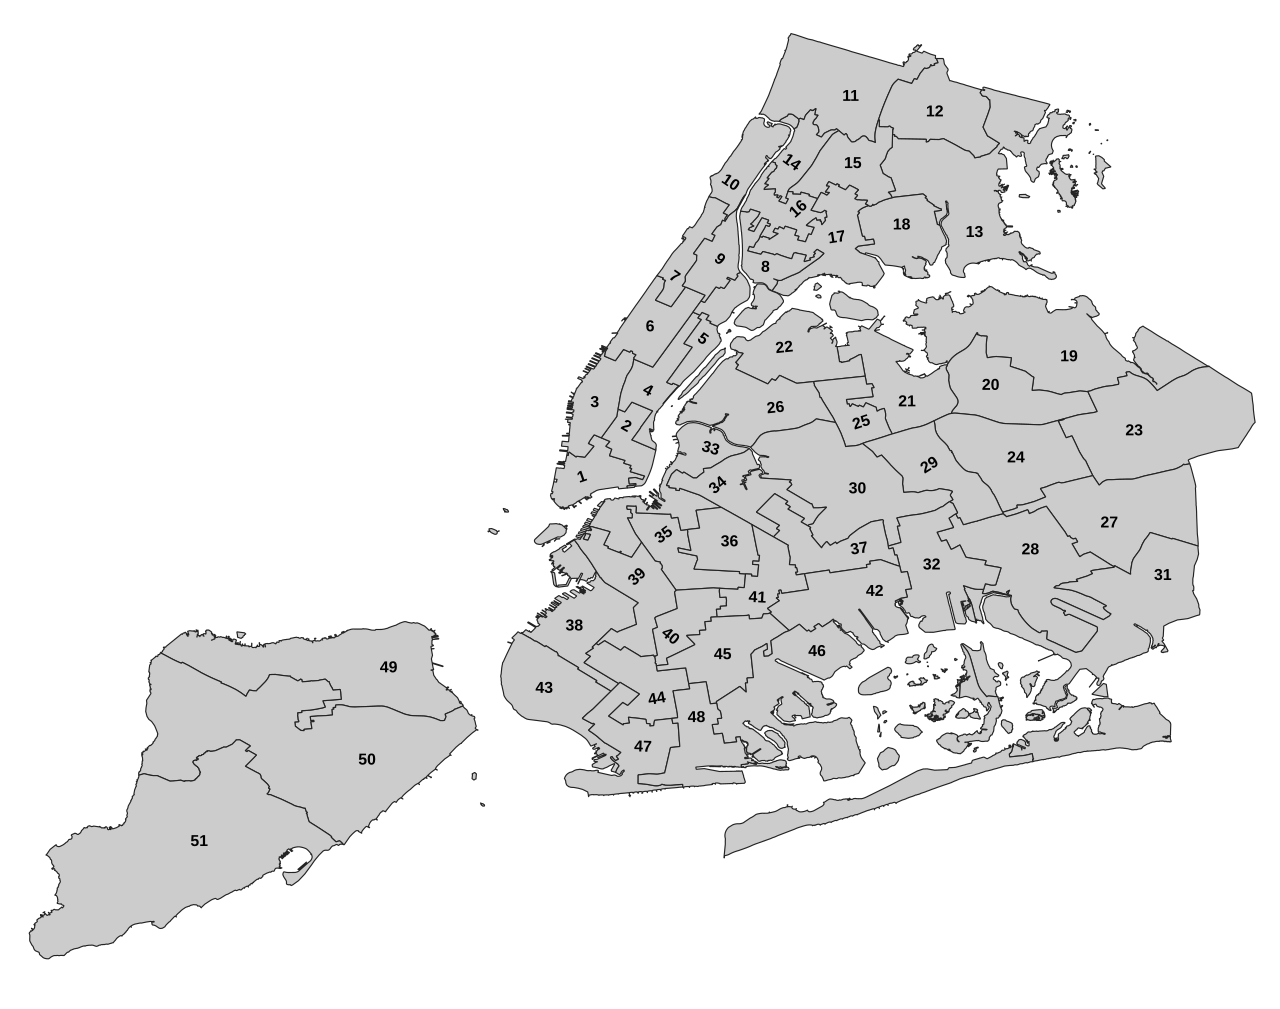 Drawing of a map illustrating NYC's Council Districts.